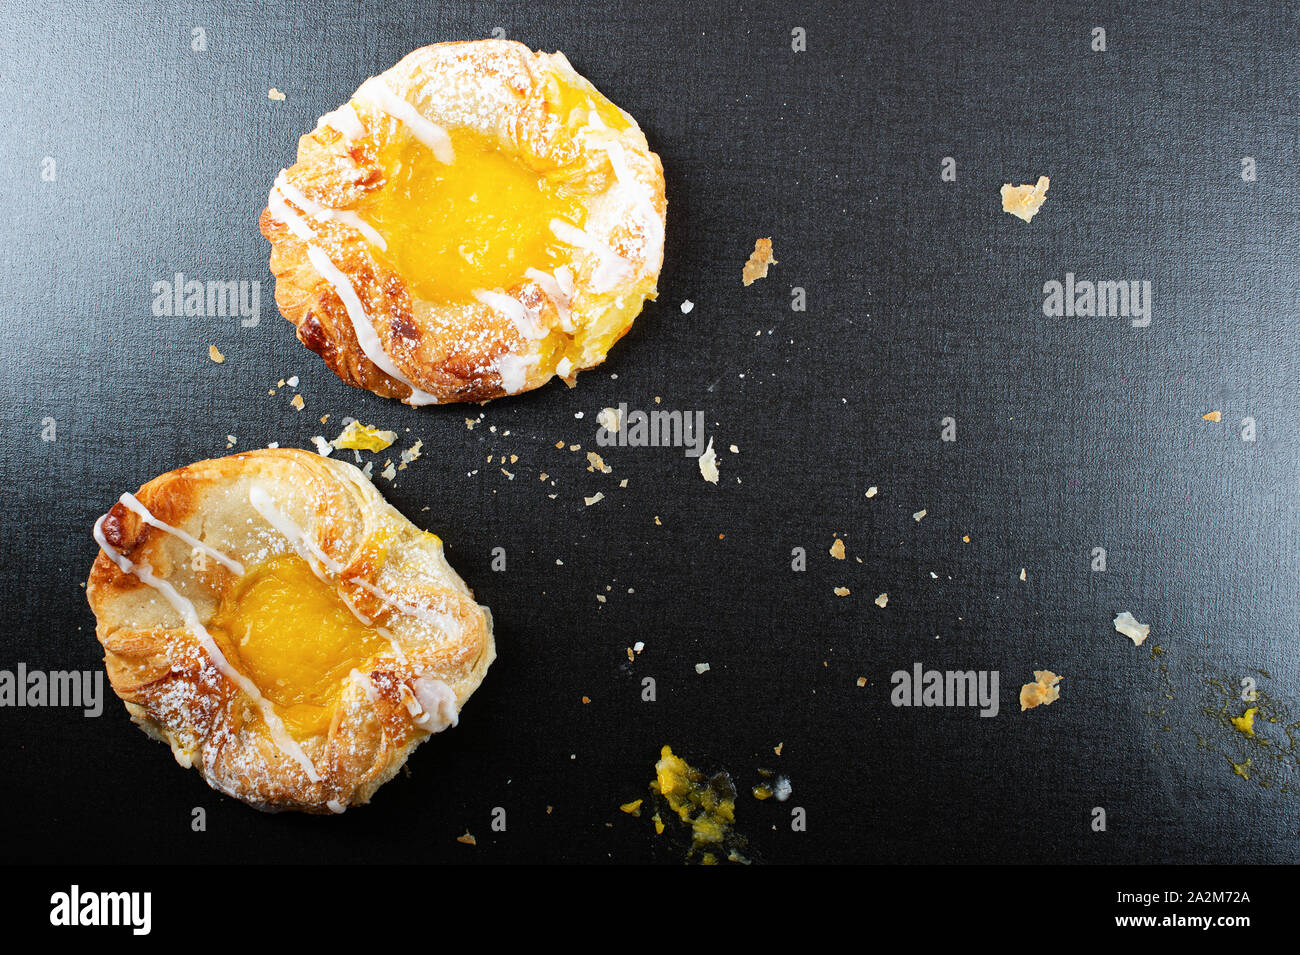 Danish custard pastry on black background with copy space Stock Photo